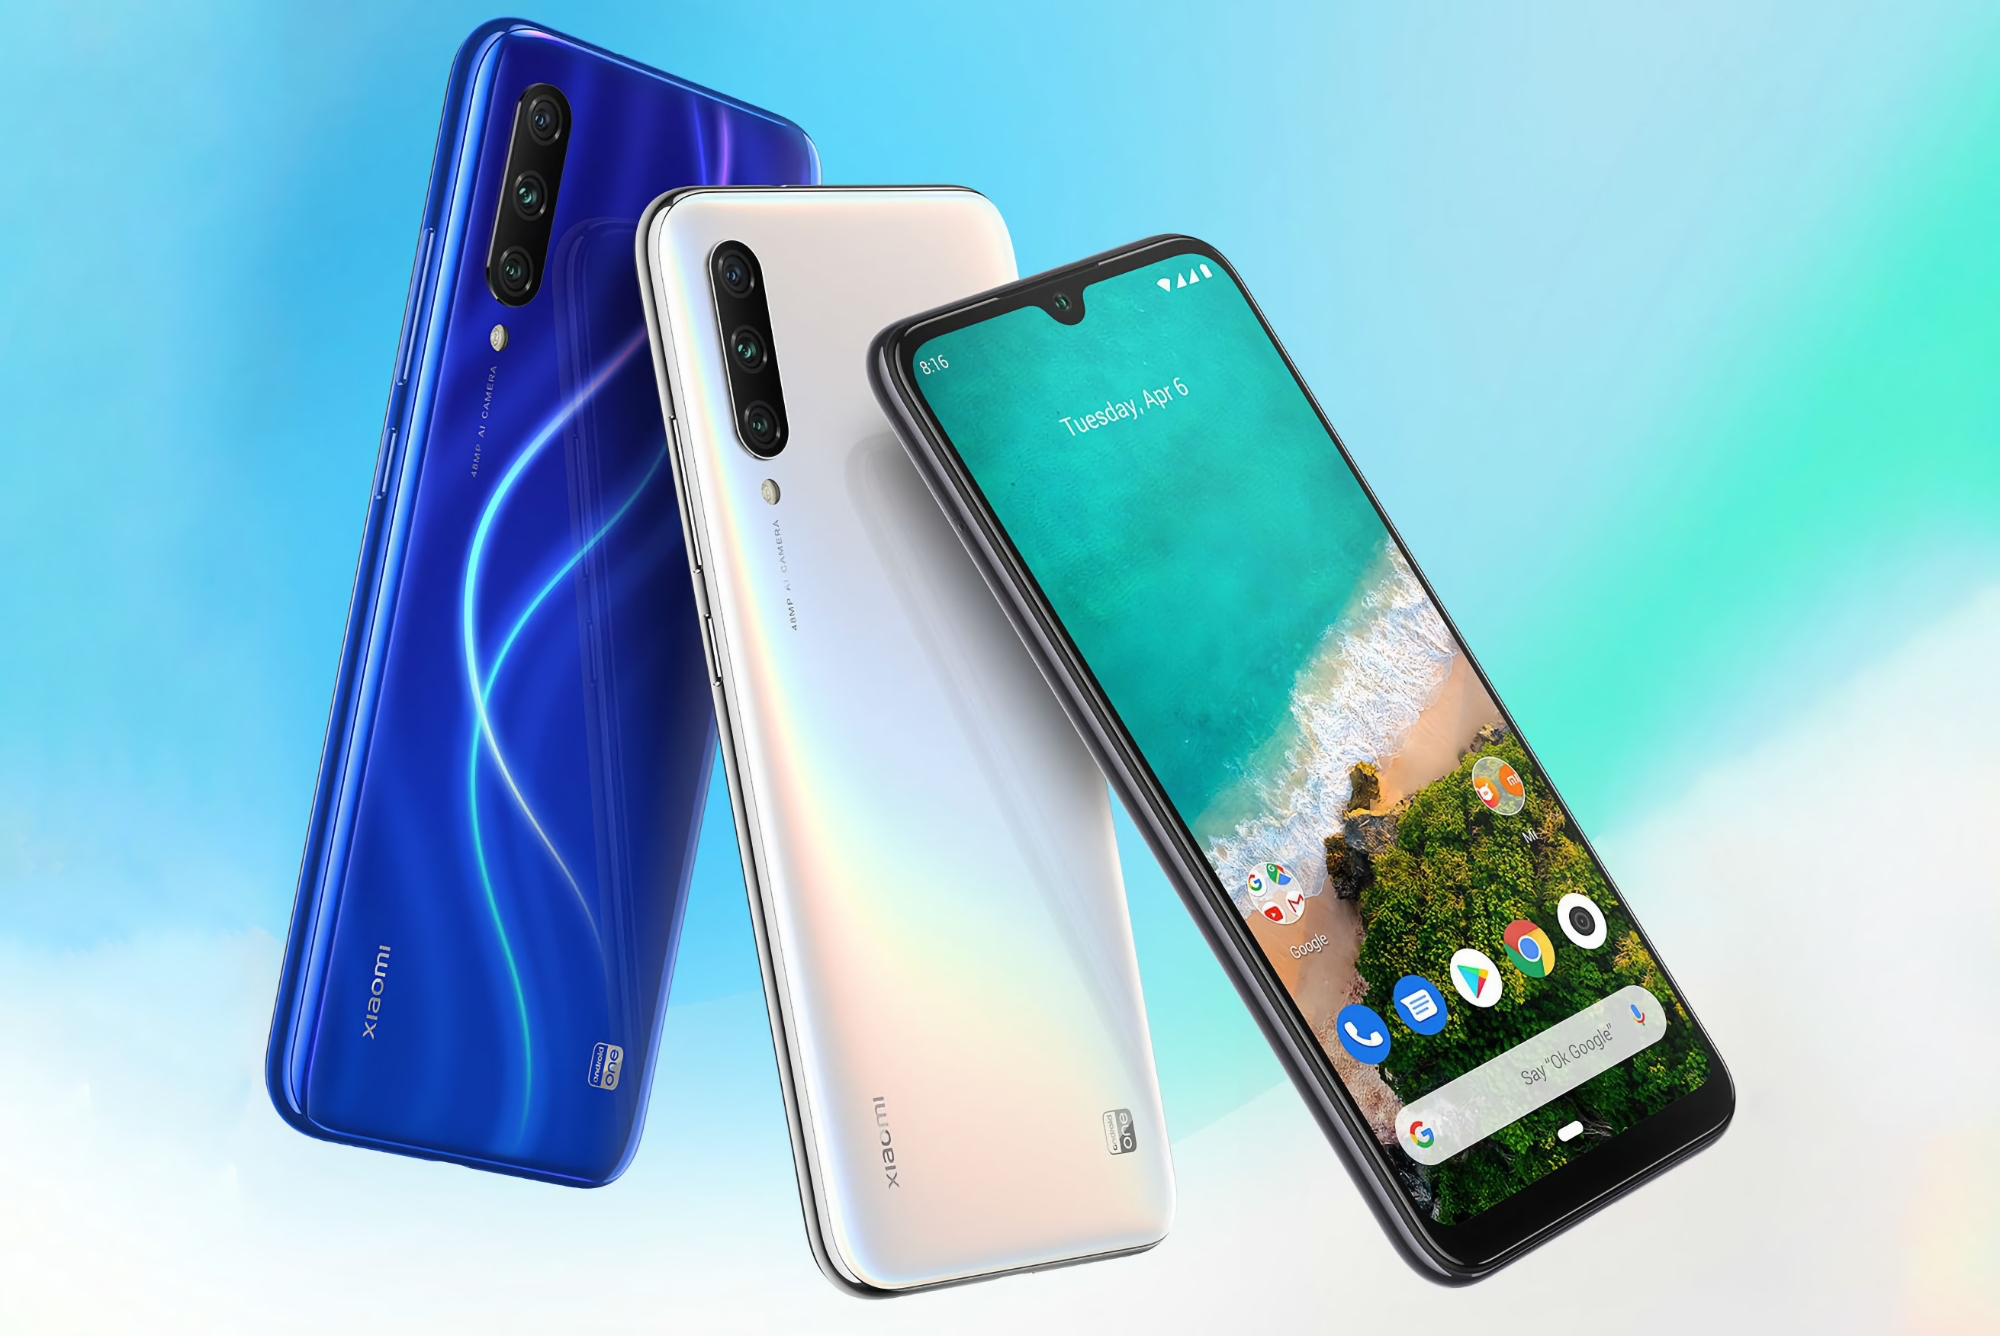 Time to retire: Xiaomi Mi A3 will no longer receive Android updates, bug fixes and new security patches